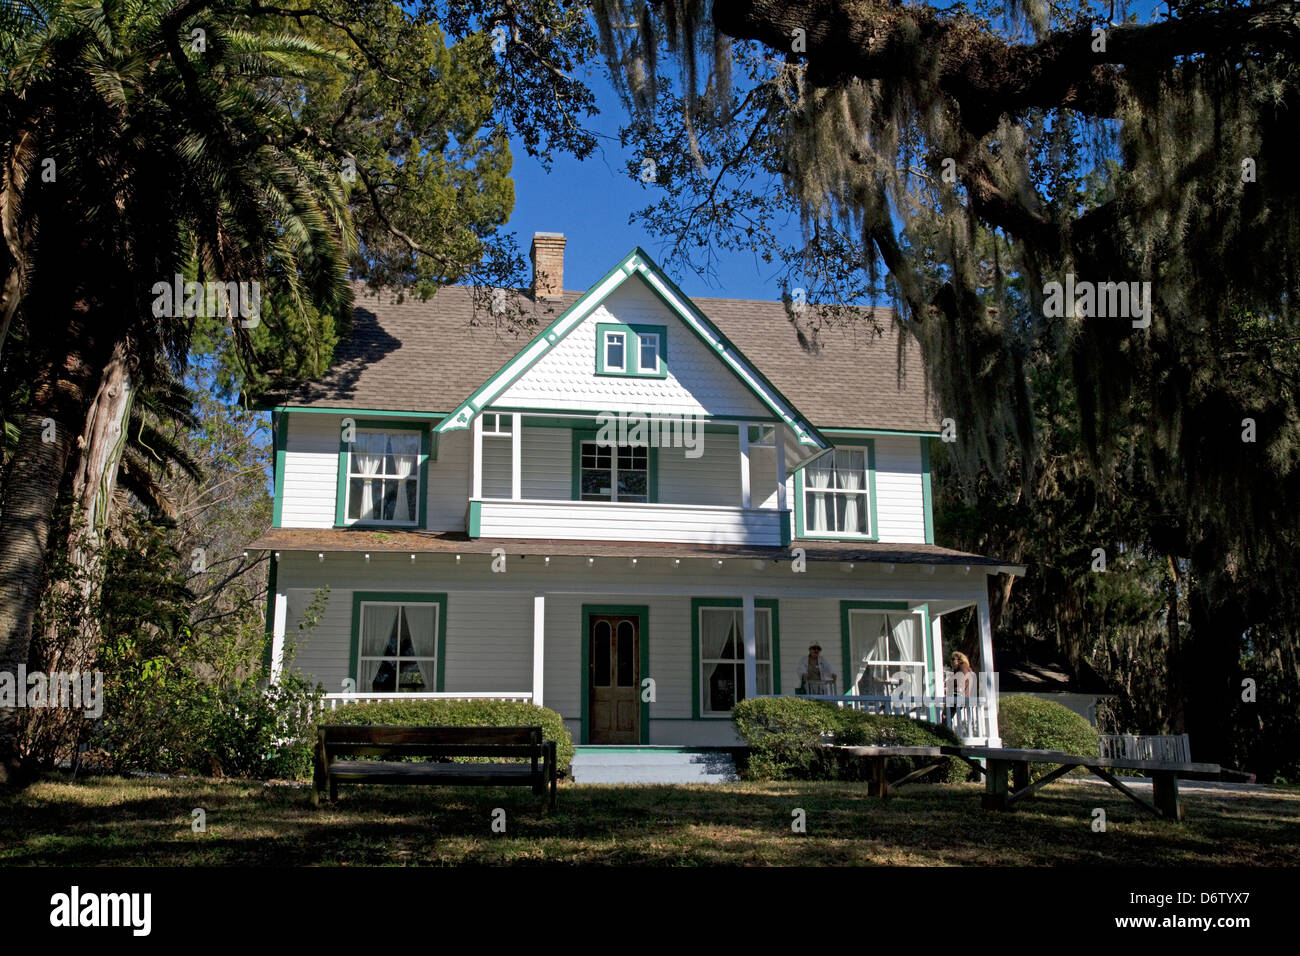 The Guptill House at Historic Spanish Point located in Osprey, Florida, USA. Stock Photo